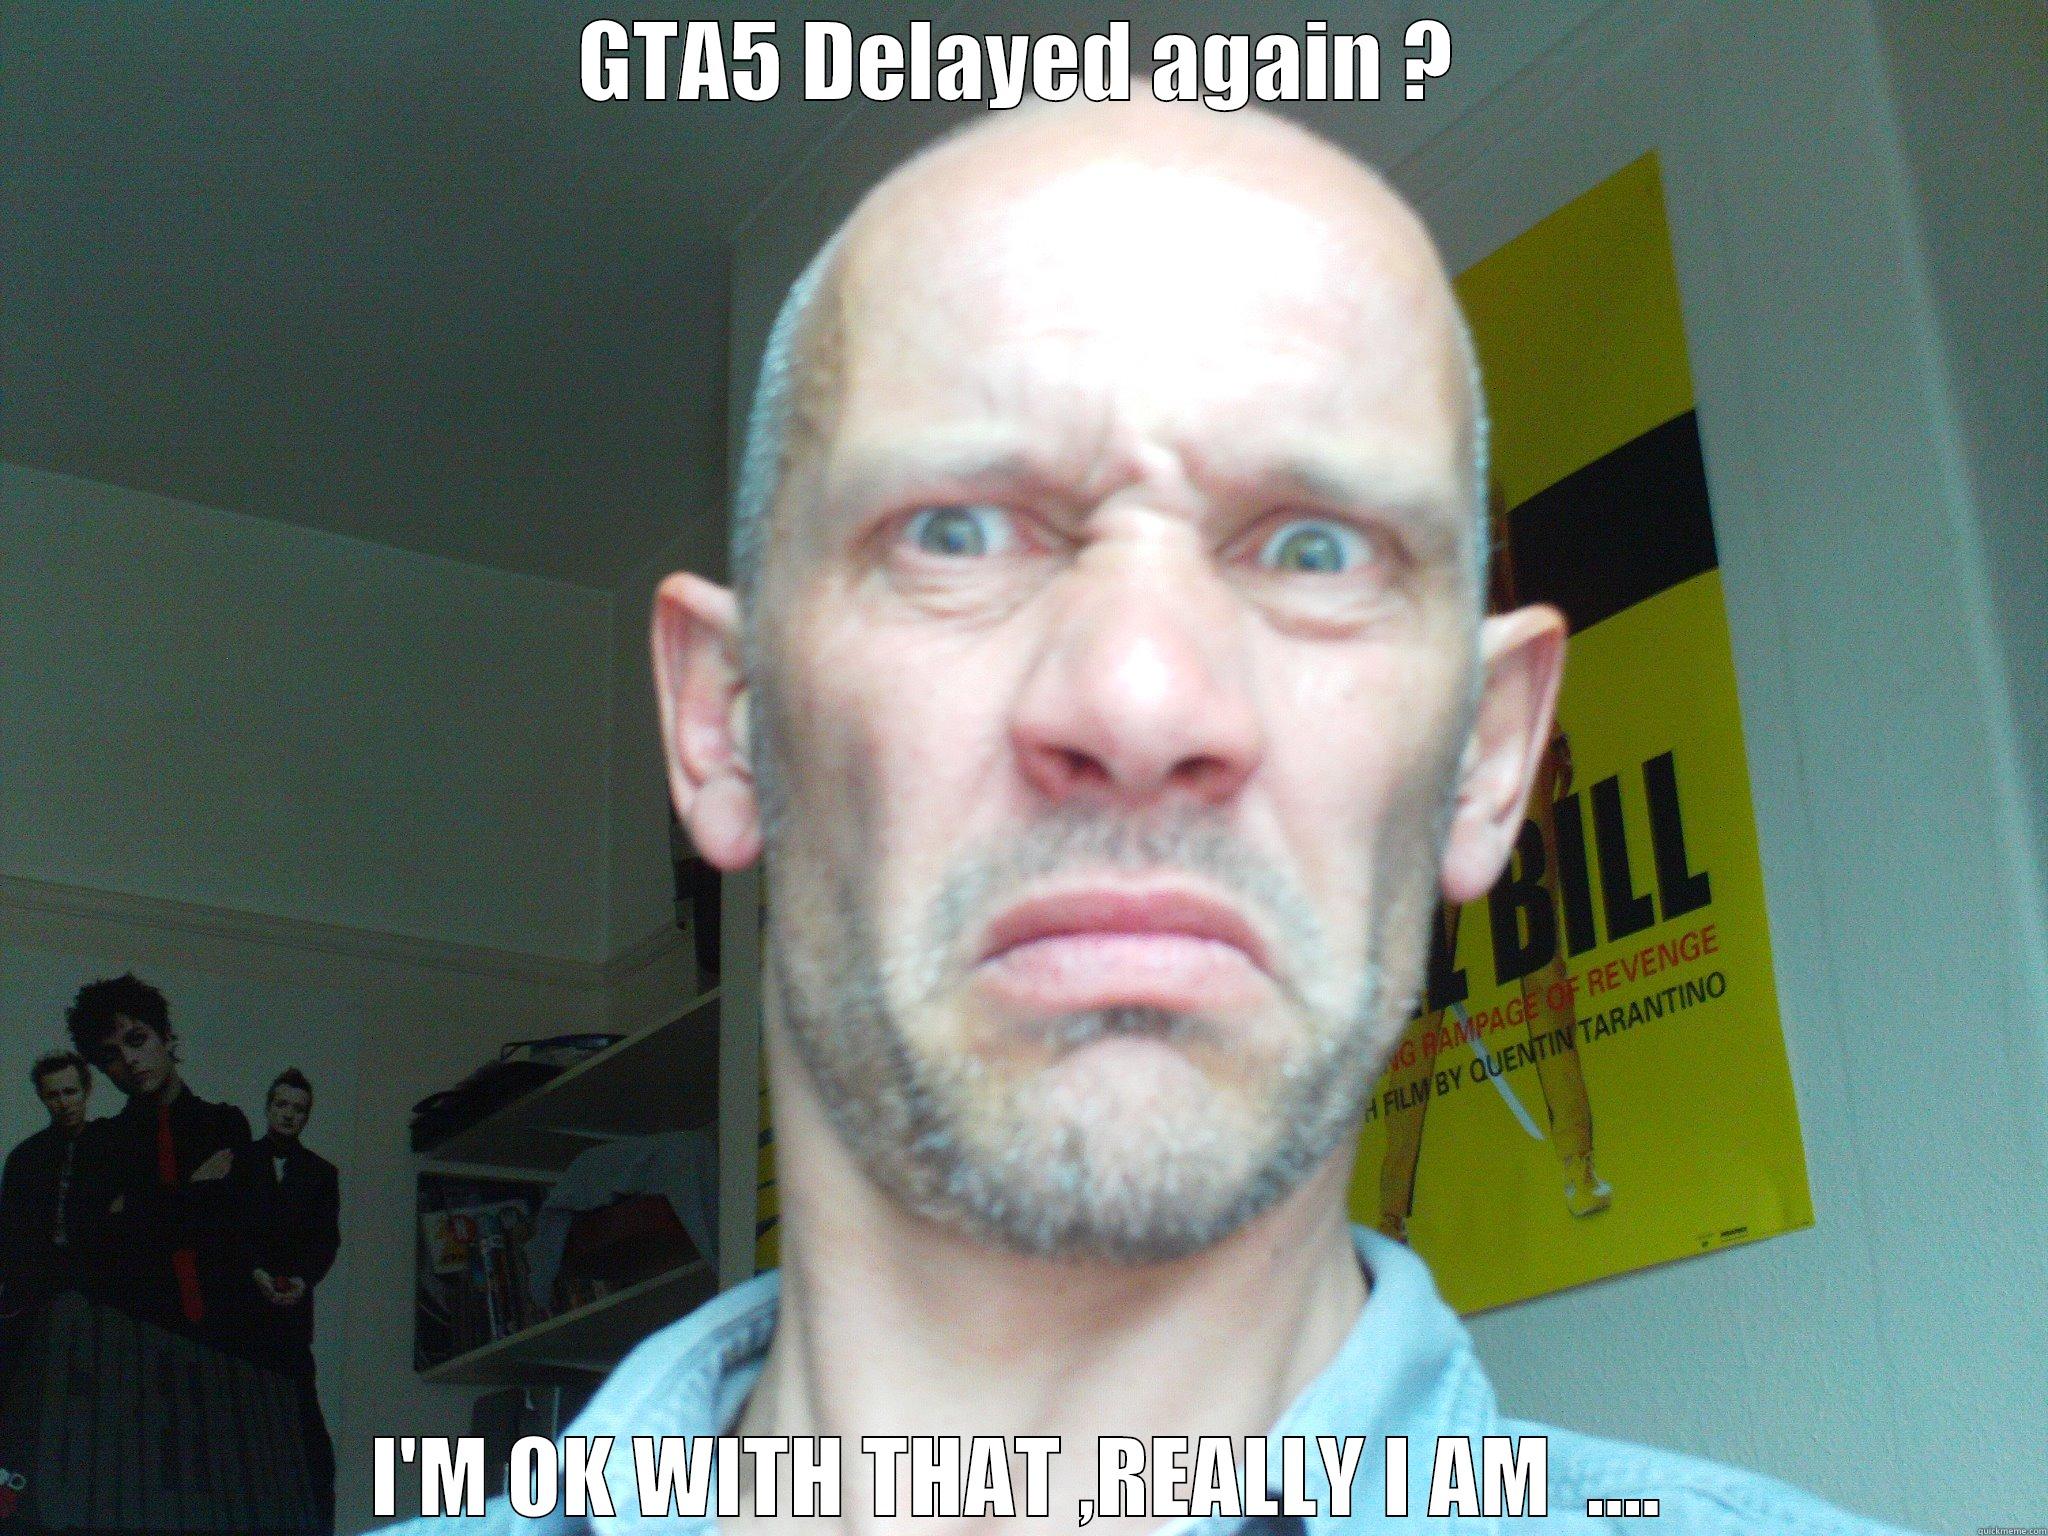 Happy Face - GTA5 DELAYED AGAIN ? I'M OK WITH THAT ,REALLY I AM  .... Misc